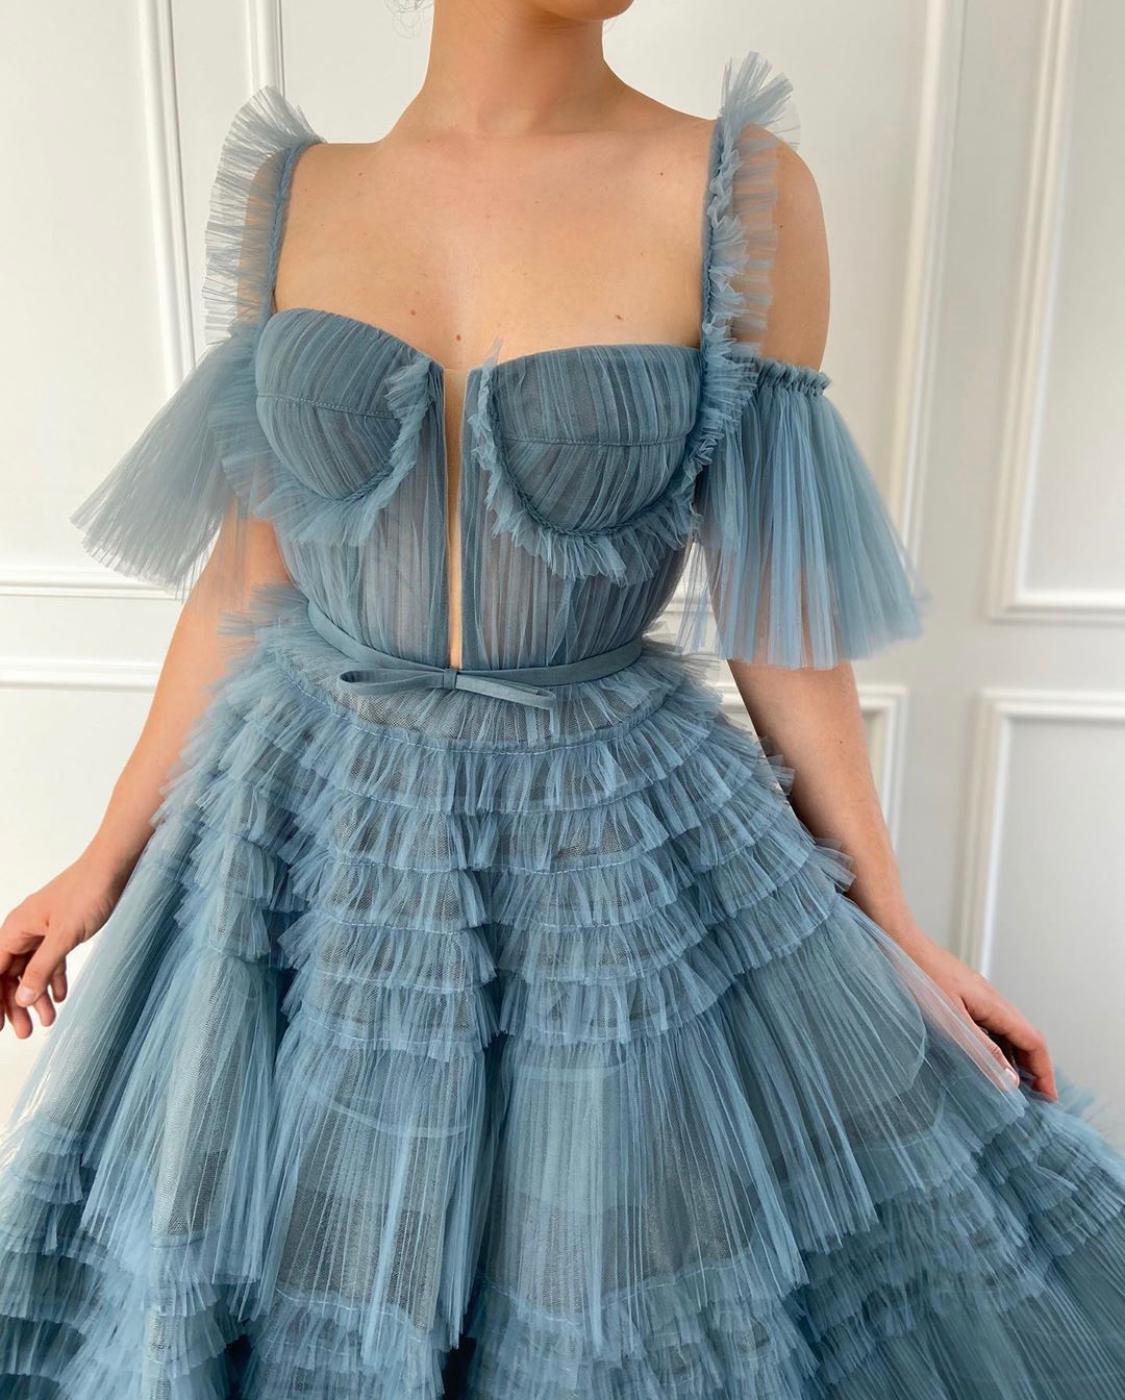 Blue A-Line dress with straps, off the shoulder sleeves and ruffles